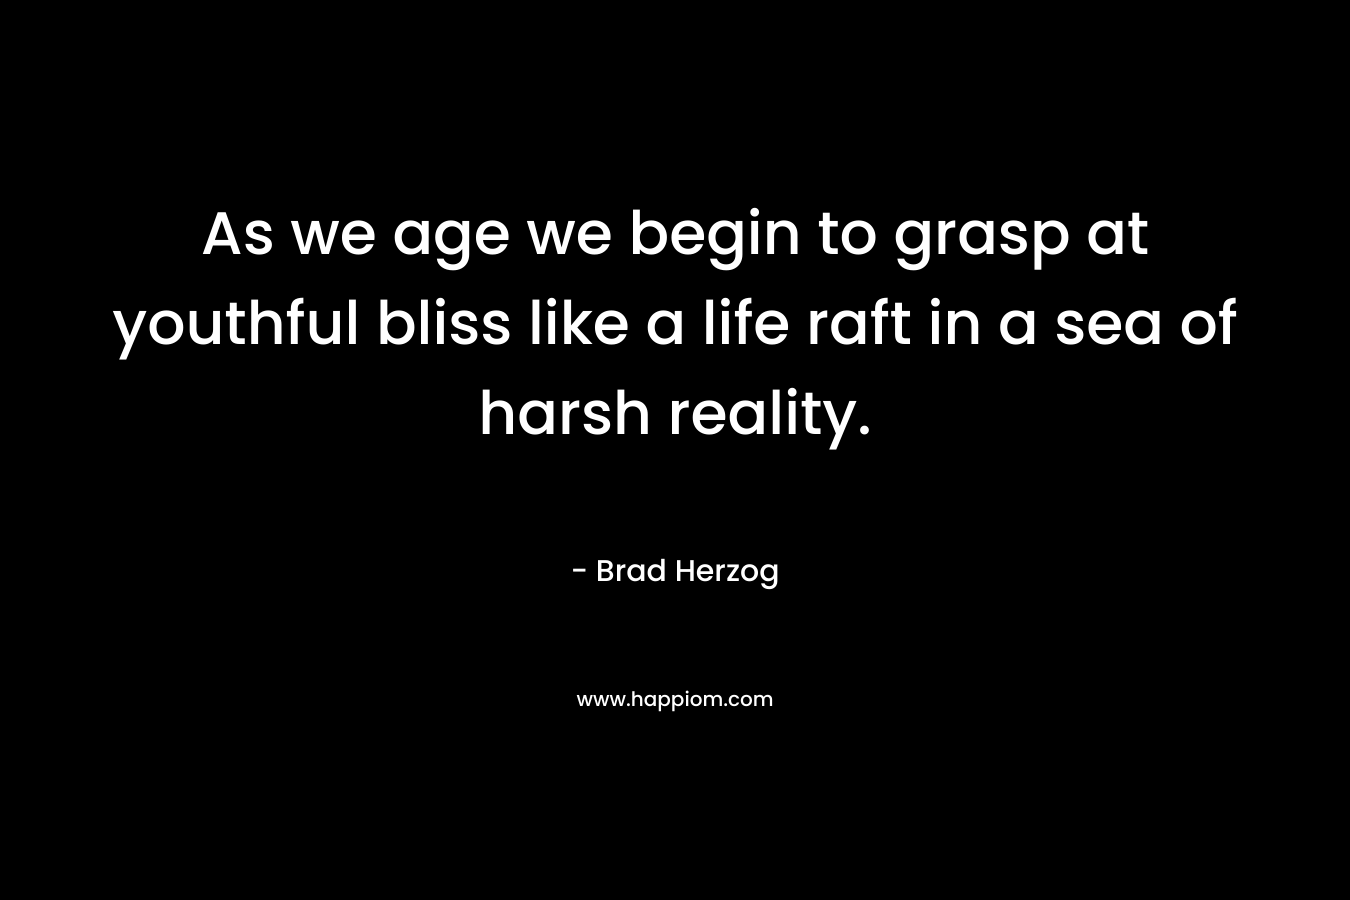 As we age we begin to grasp at youthful bliss like a life raft in a sea of harsh reality. – Brad Herzog